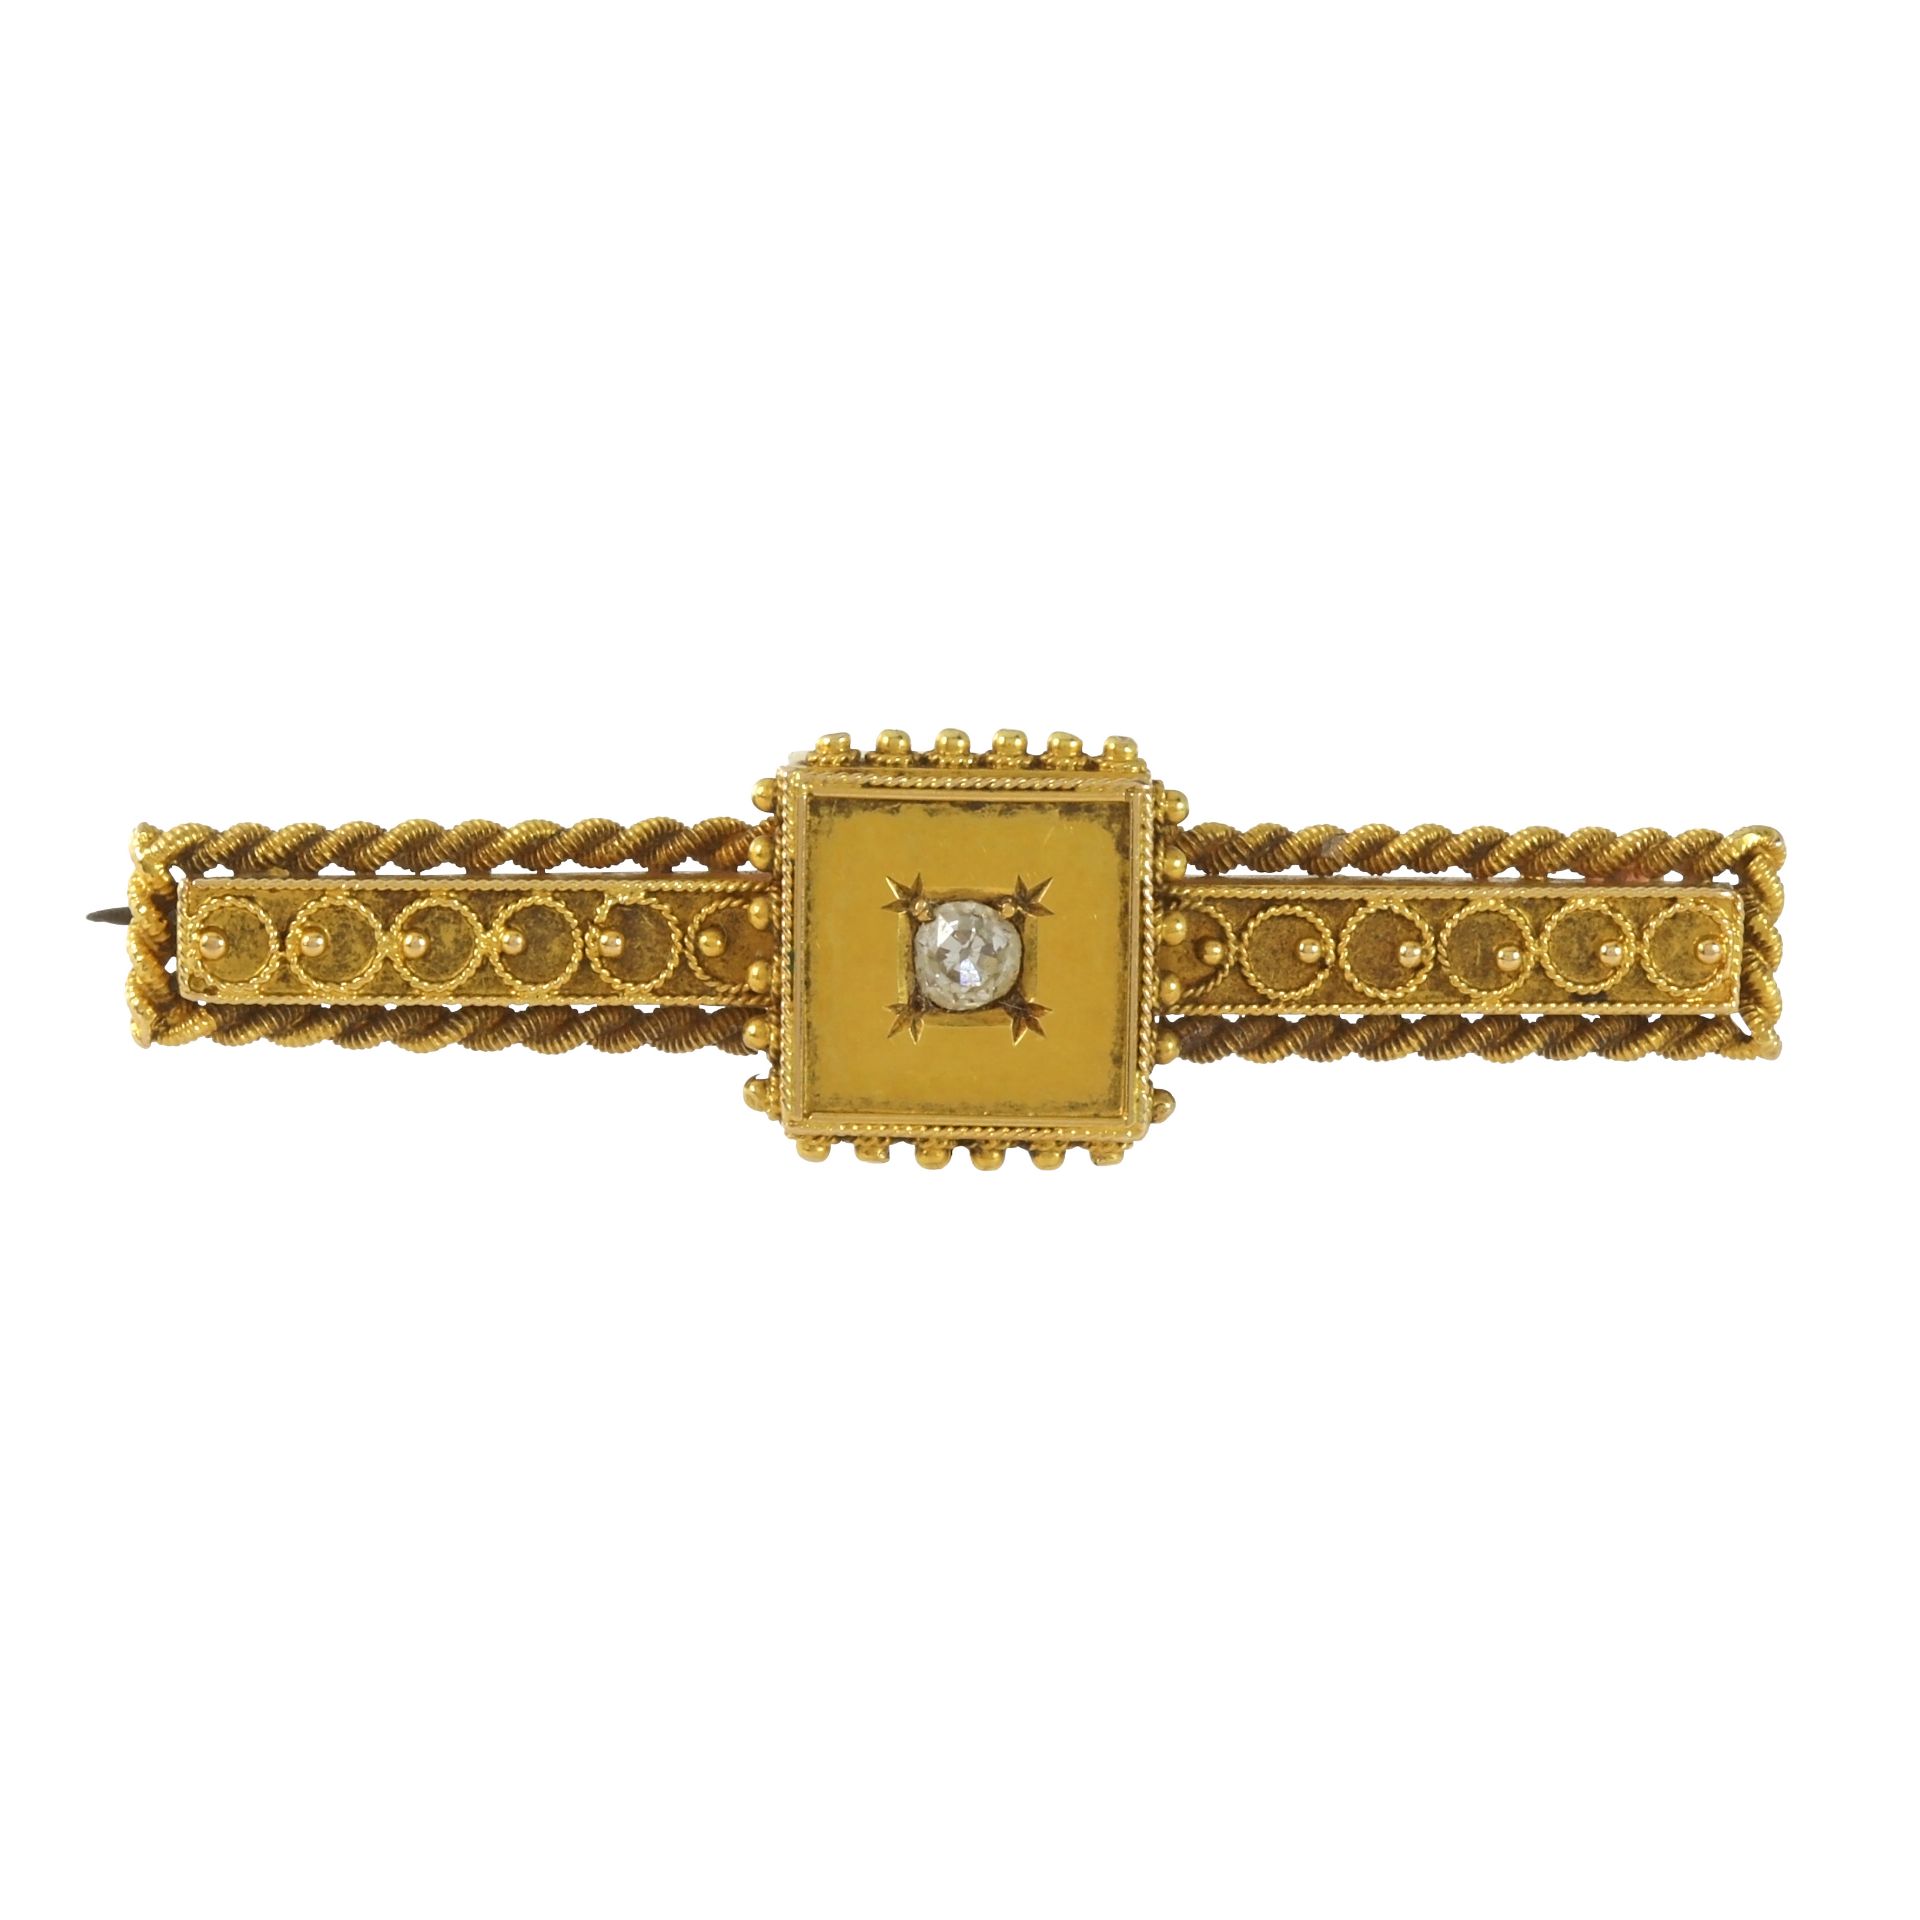 AN ANTIQUE DIAMOND BROOCH, LATE 19TH CENTURY in 15ct yellow gold, in the Etruscan revival style, the